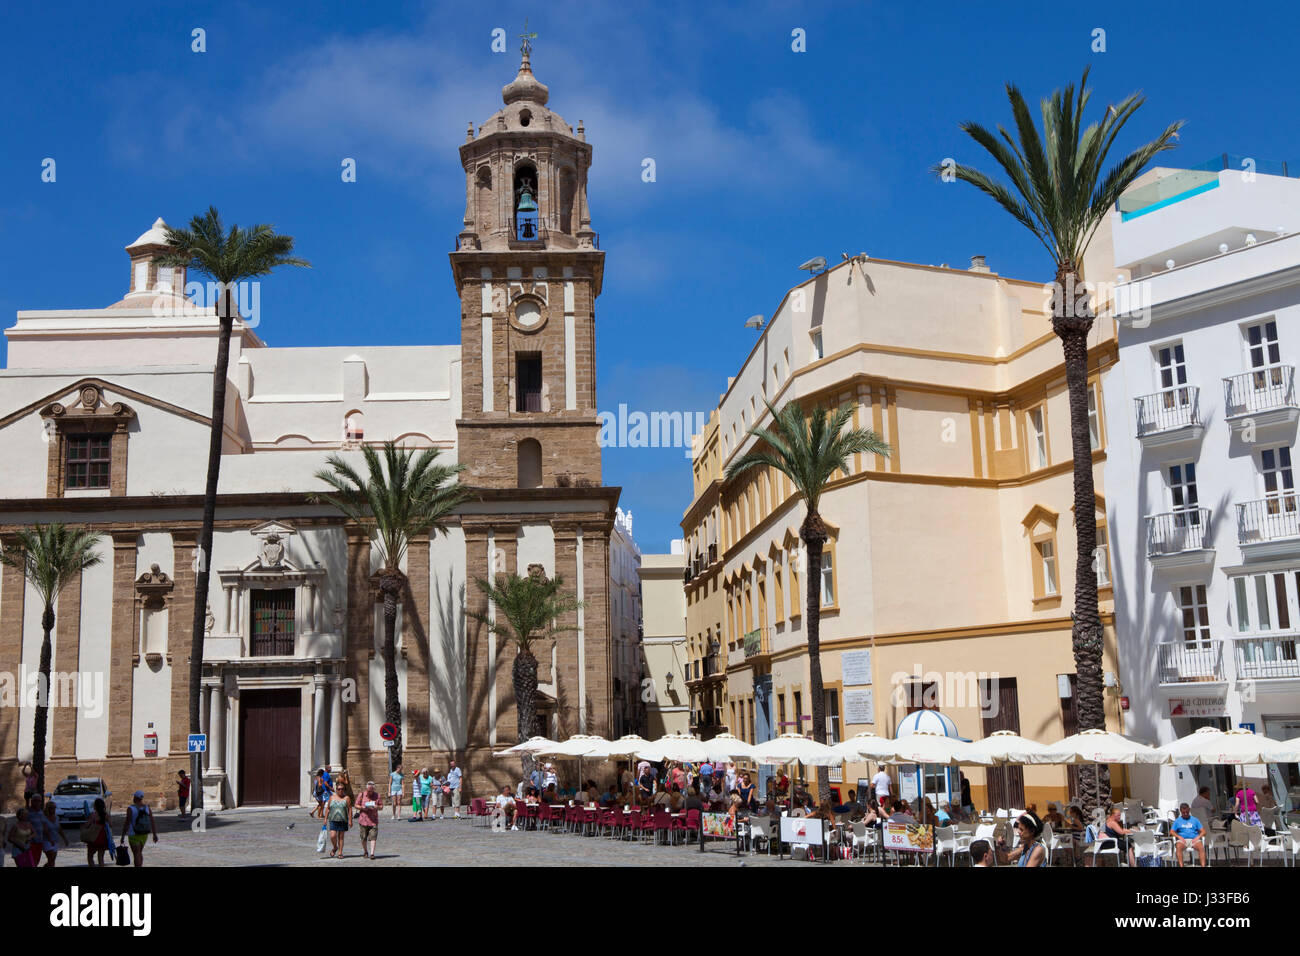 Plaza de la Catedral, square with Cathedral in the historical town of Cadiz, Cadiz Province, Andalusia, Spain, Europe Stock Photo